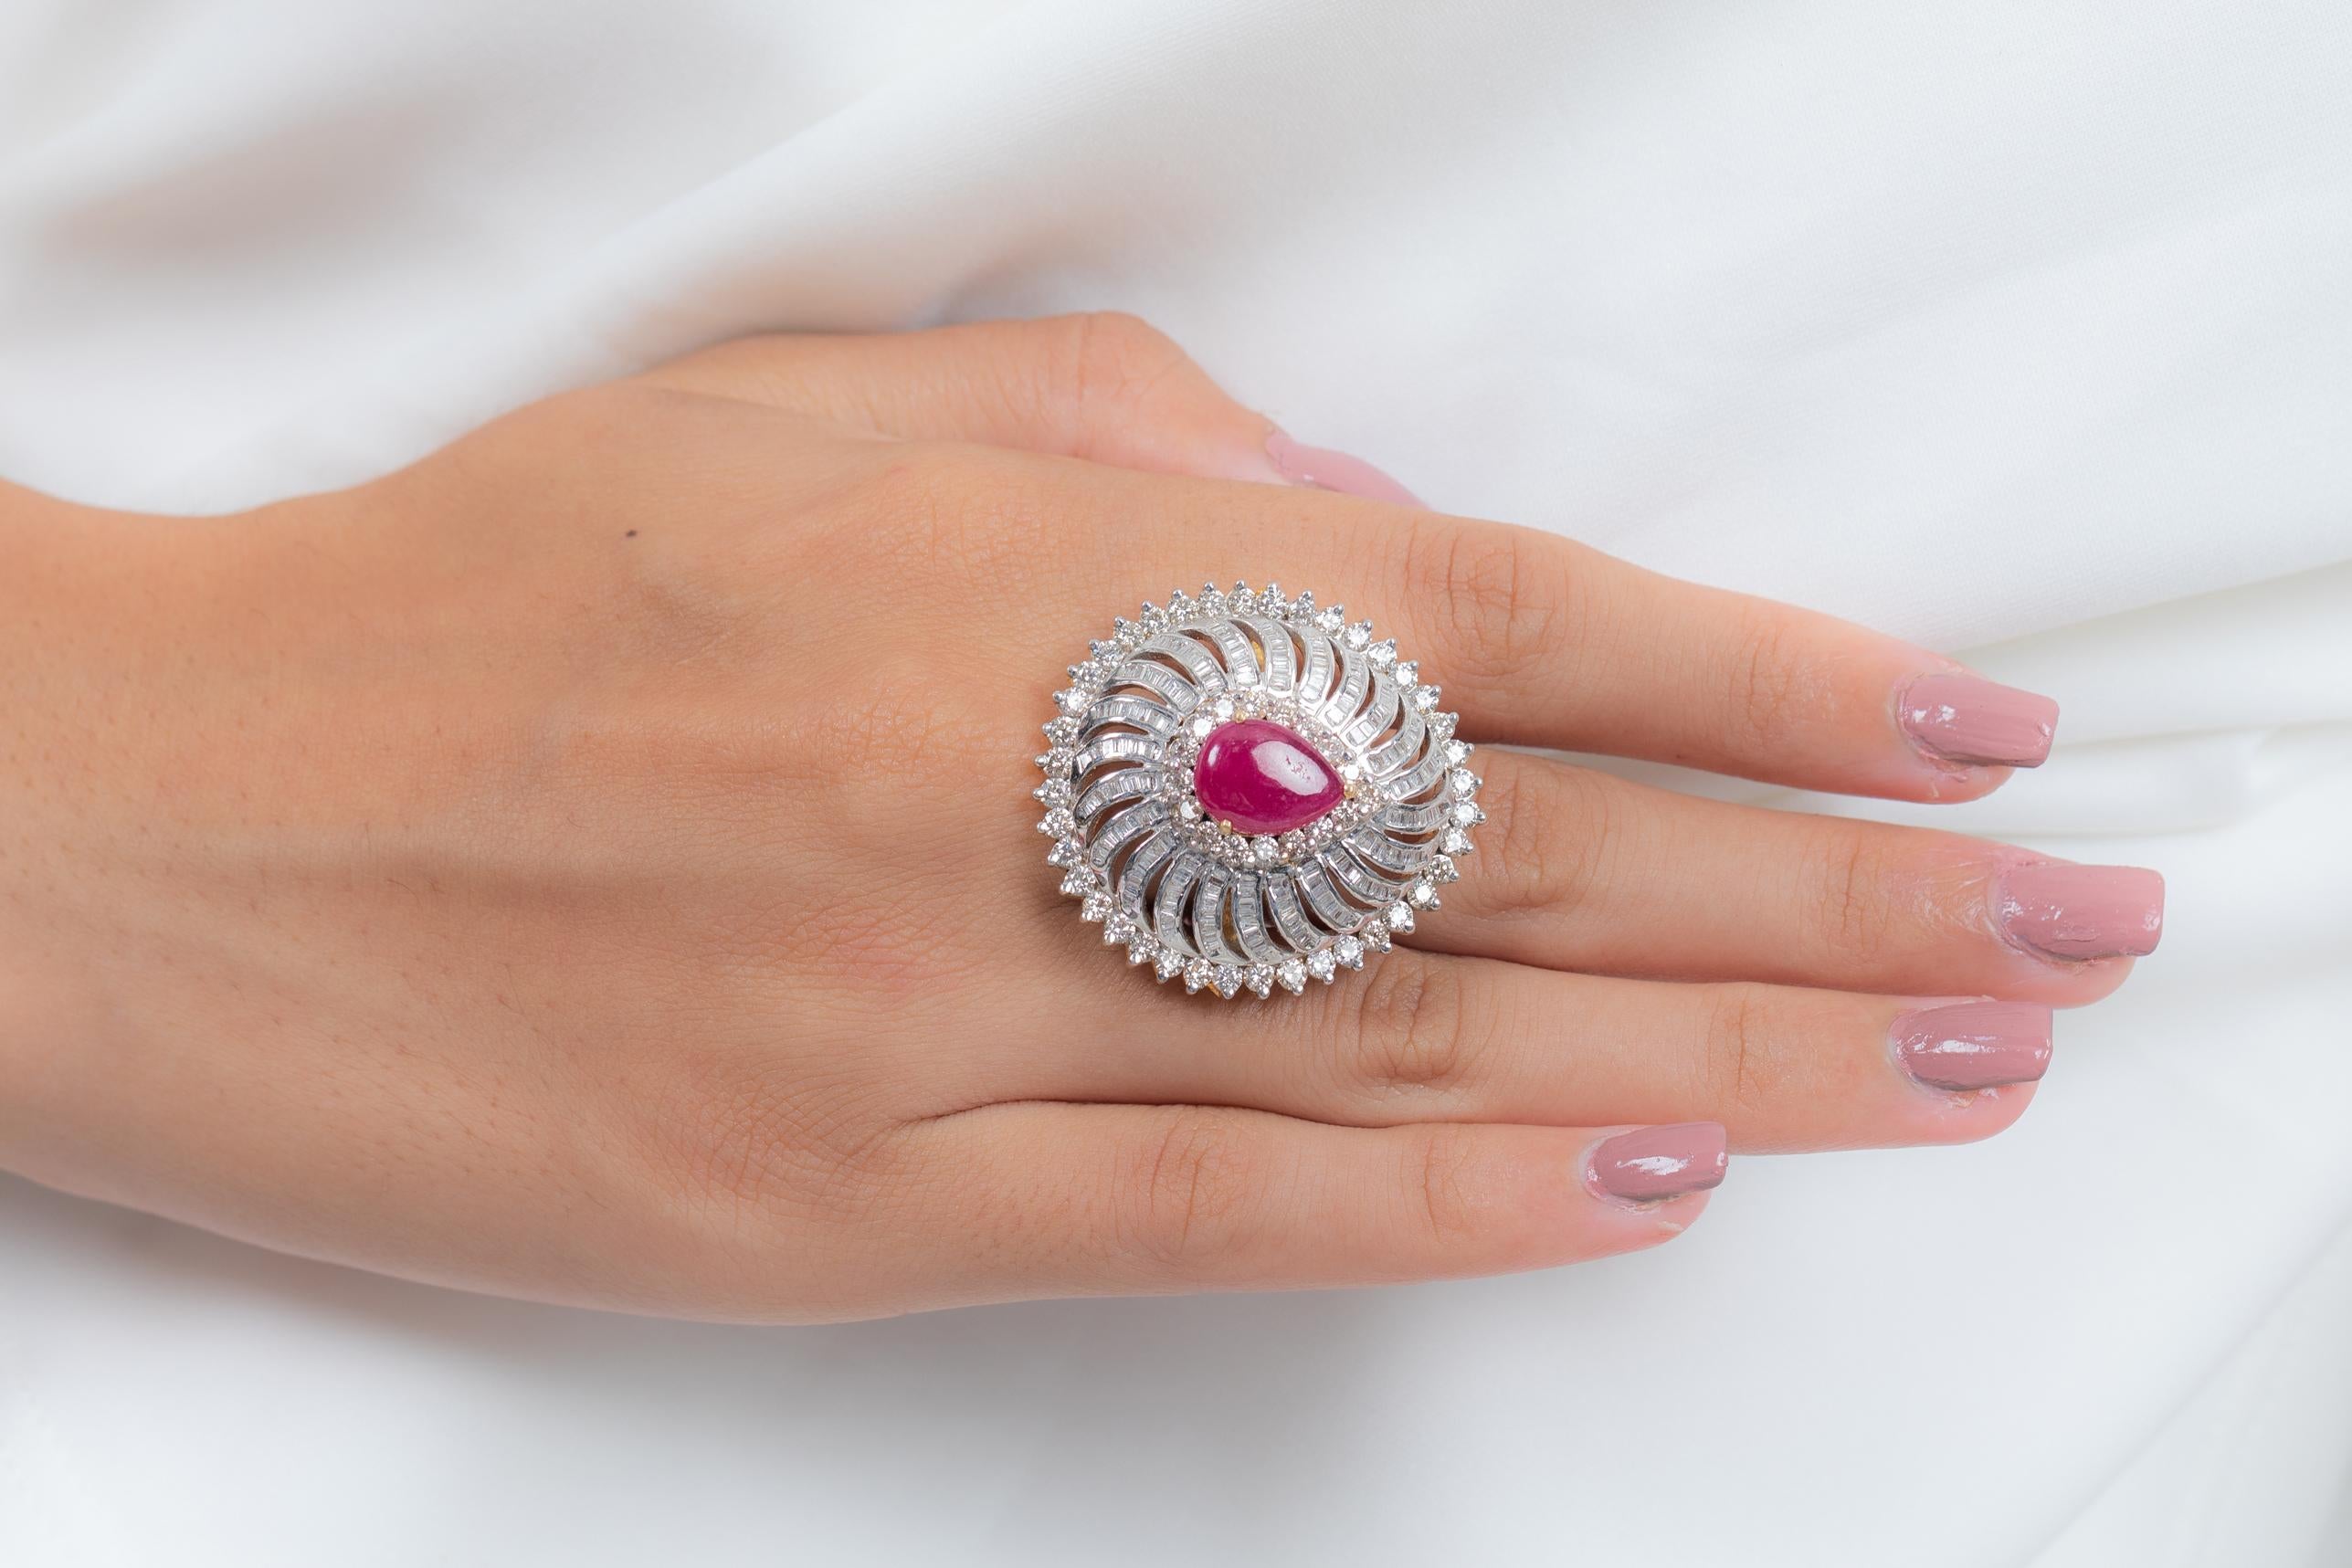 For Sale:  Statement Ruby Cocktail Ring with Halo of Diamonds in 14K White Gold 6